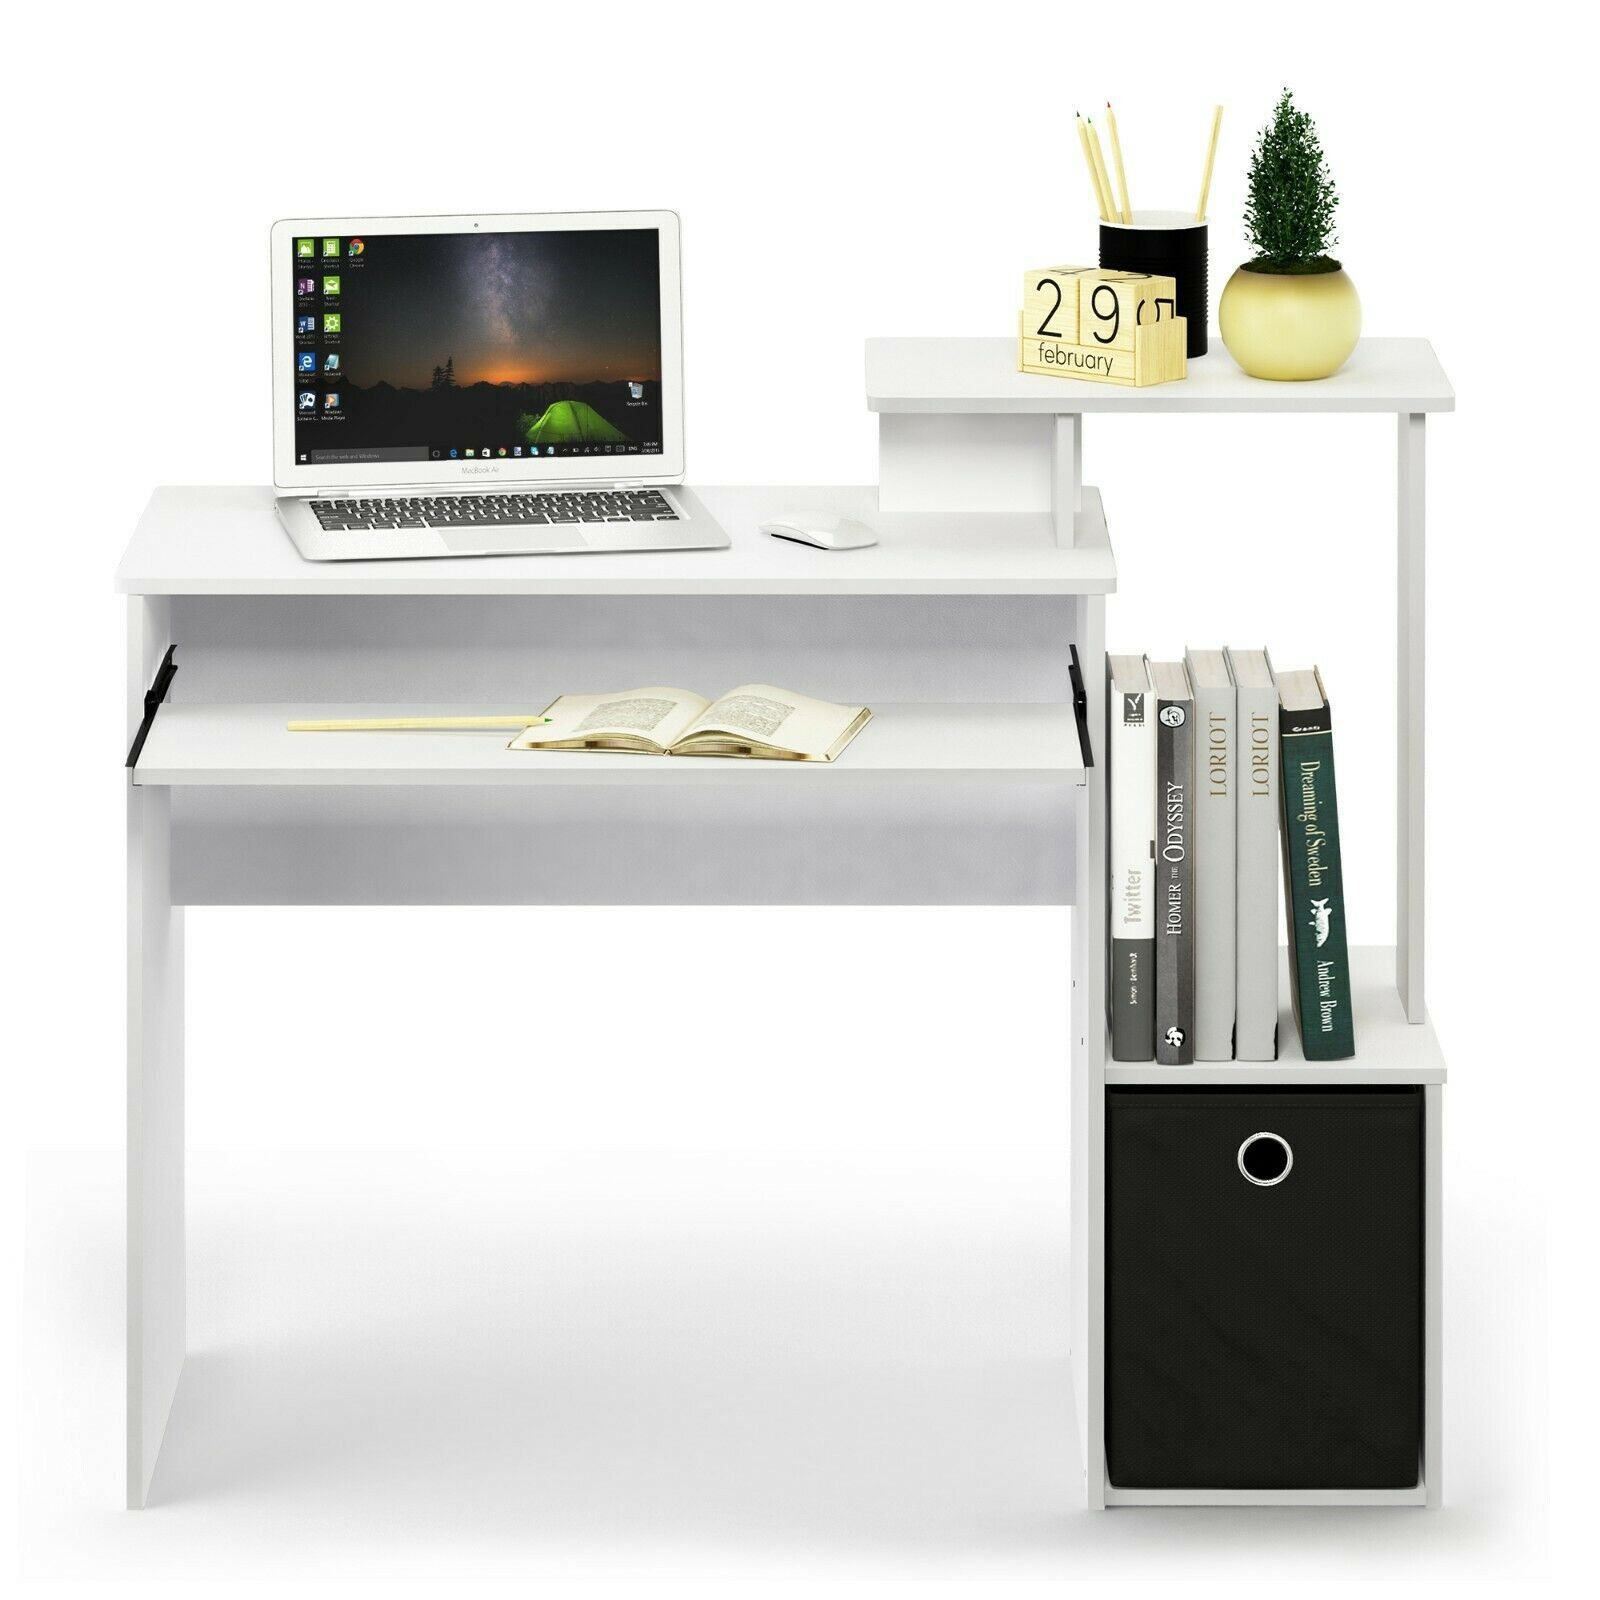 -Defined by its clean-lined silhouette and compact footprint, this Econ Multipurpose Home Office Computer Writing Desk is an ideal workspace for smaller spaces in your home.
- Features slide-out keyboard drawer, CPU Storage and a non-woven drawer. 
- This computer desk is easy assembly with step by step instruction.
- Care instructions: wipe clean with clean damped cloth. Avoid using harsh chemicals.